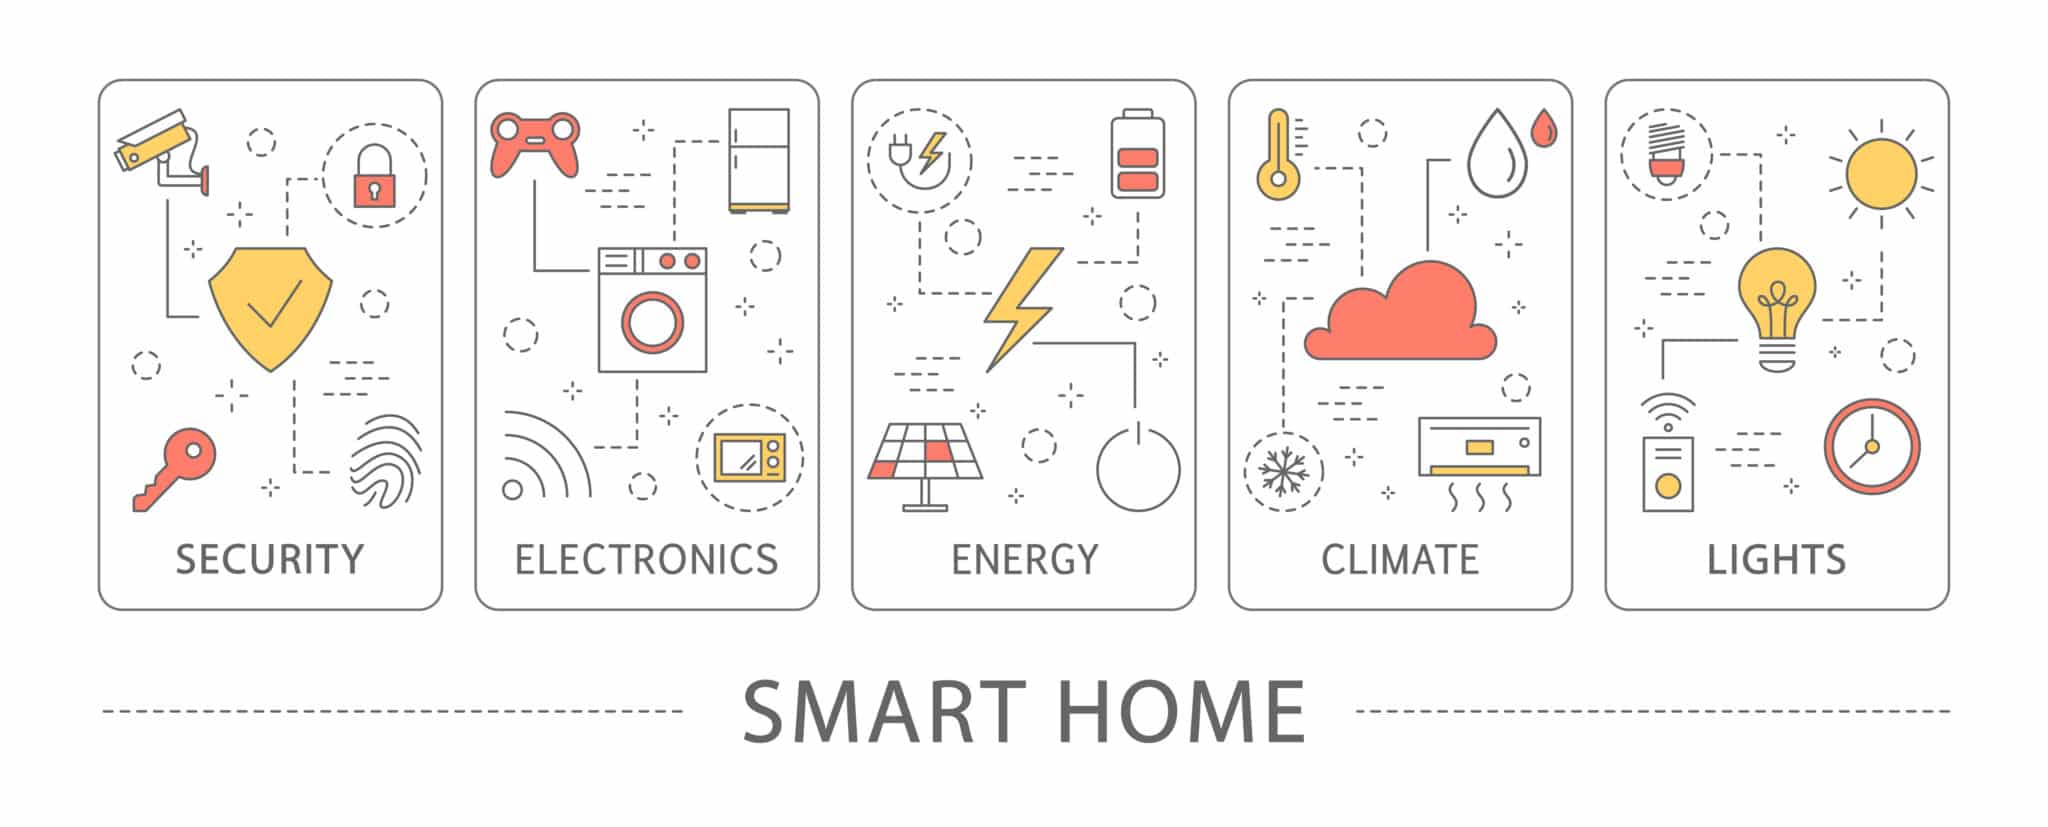 Smart home areas.